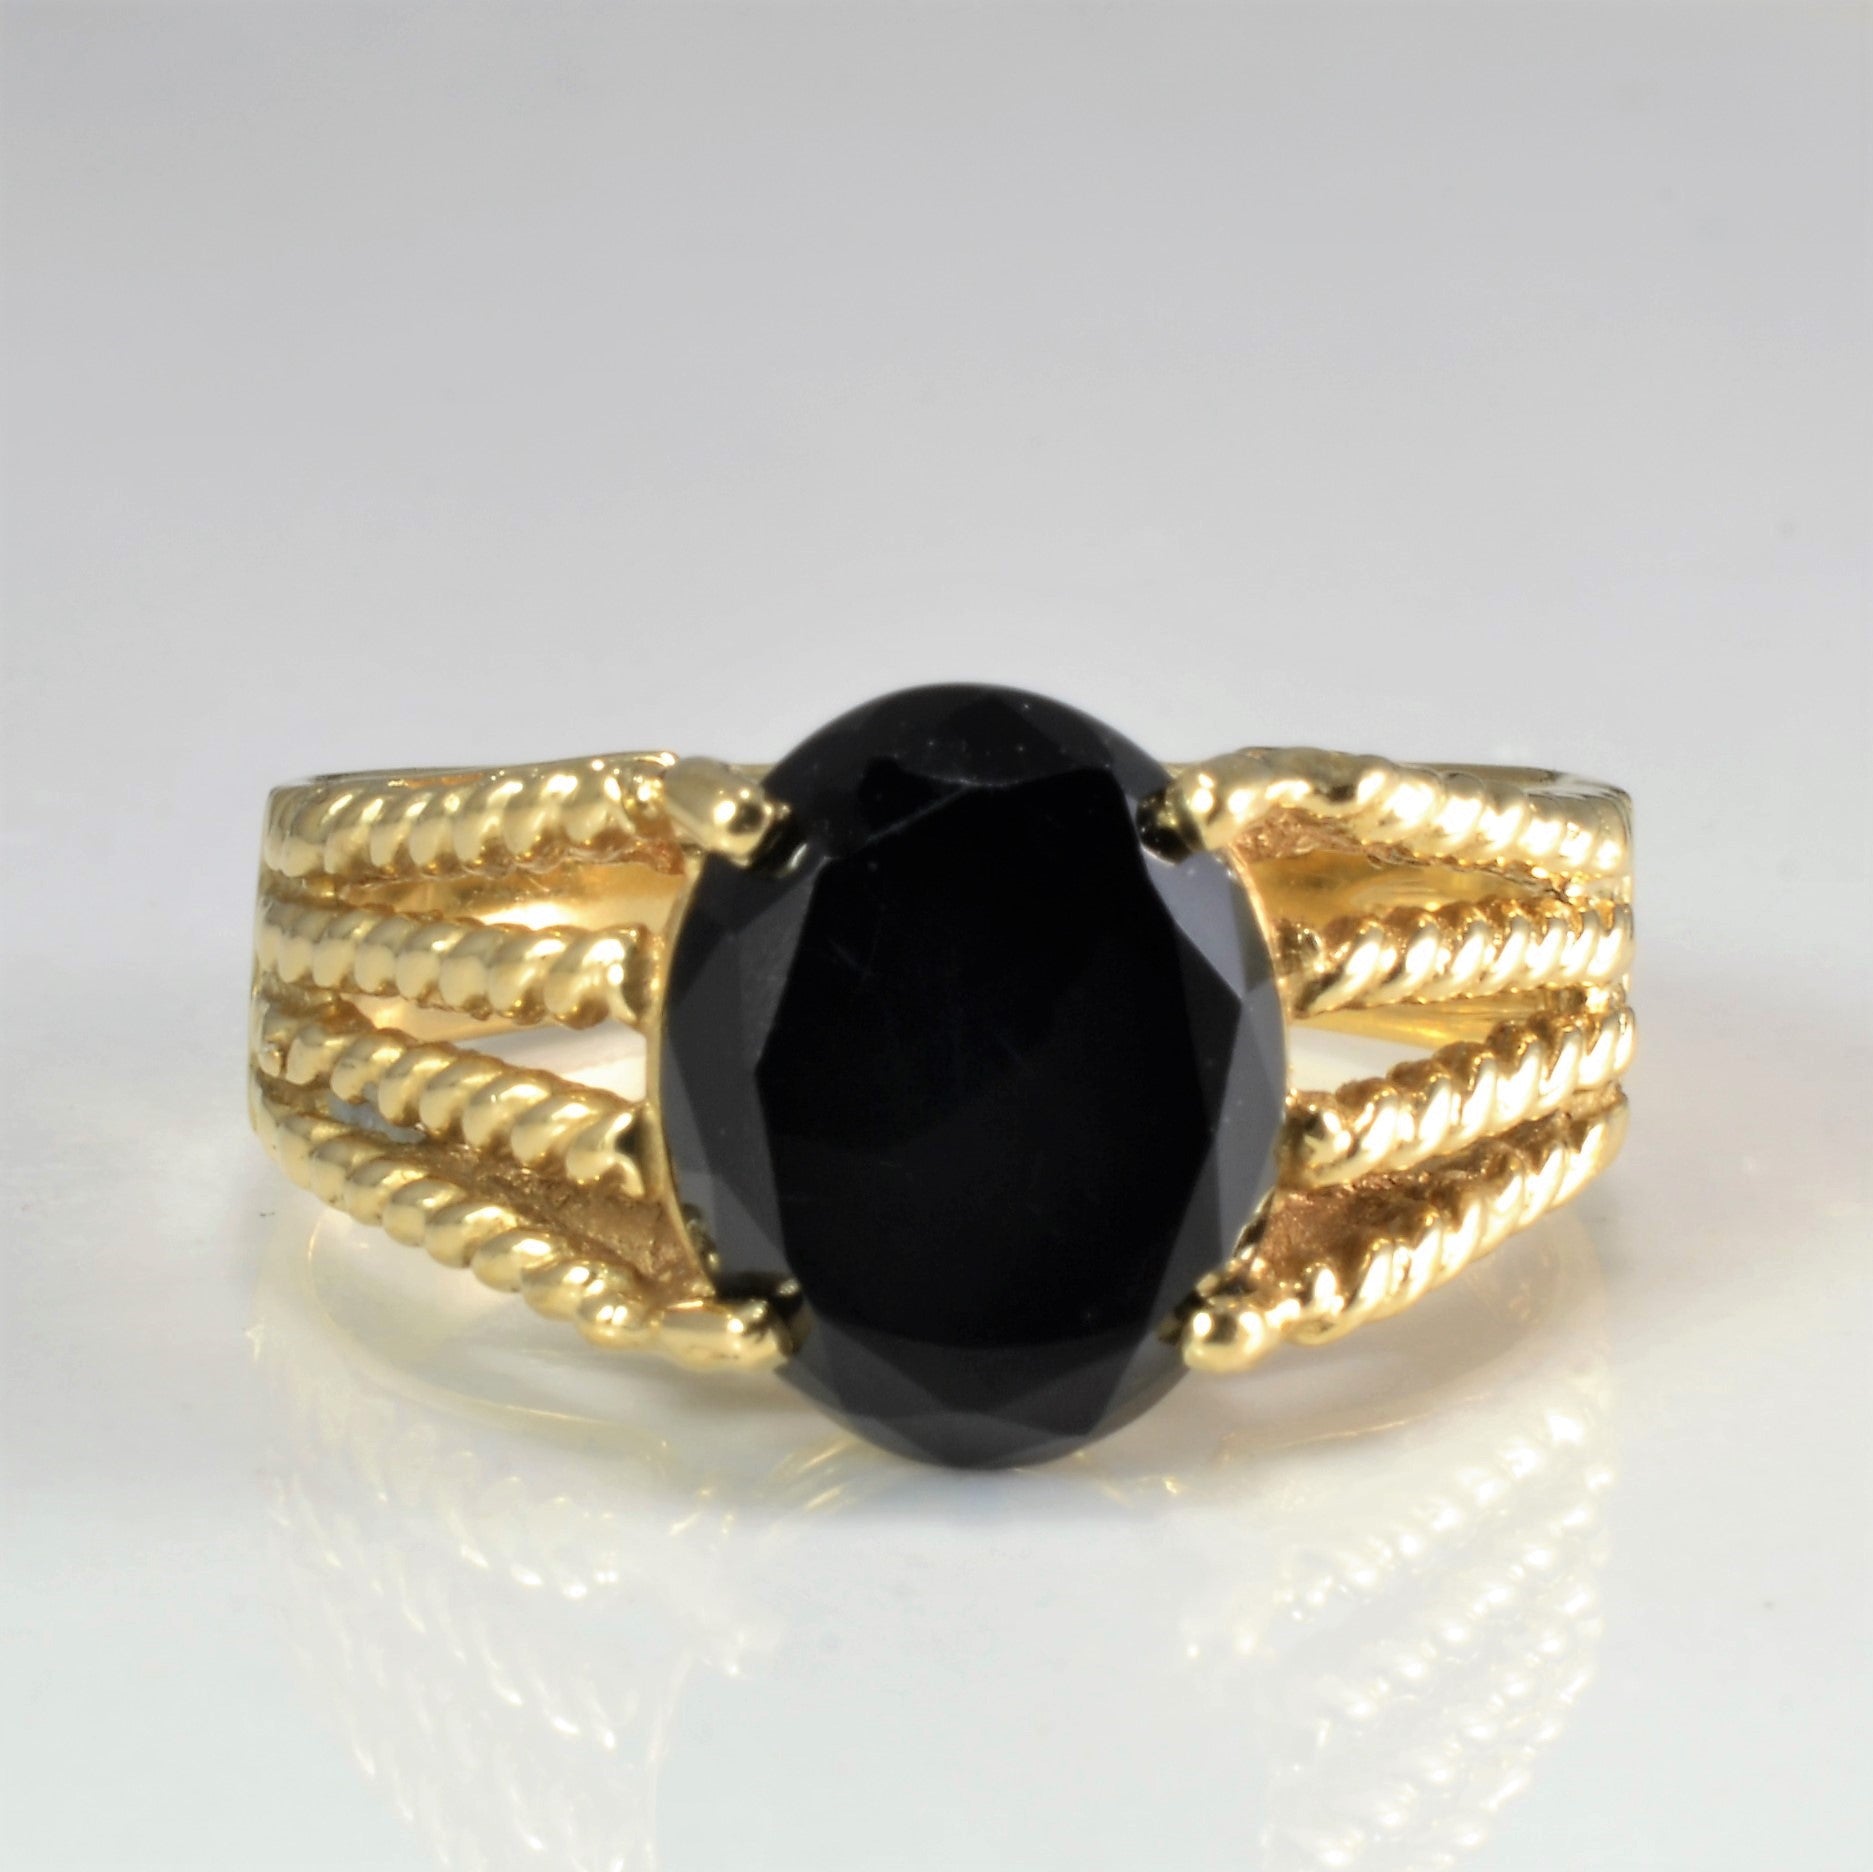 Prong Set Solitaire Onyx Ring | SZ 6.25 |